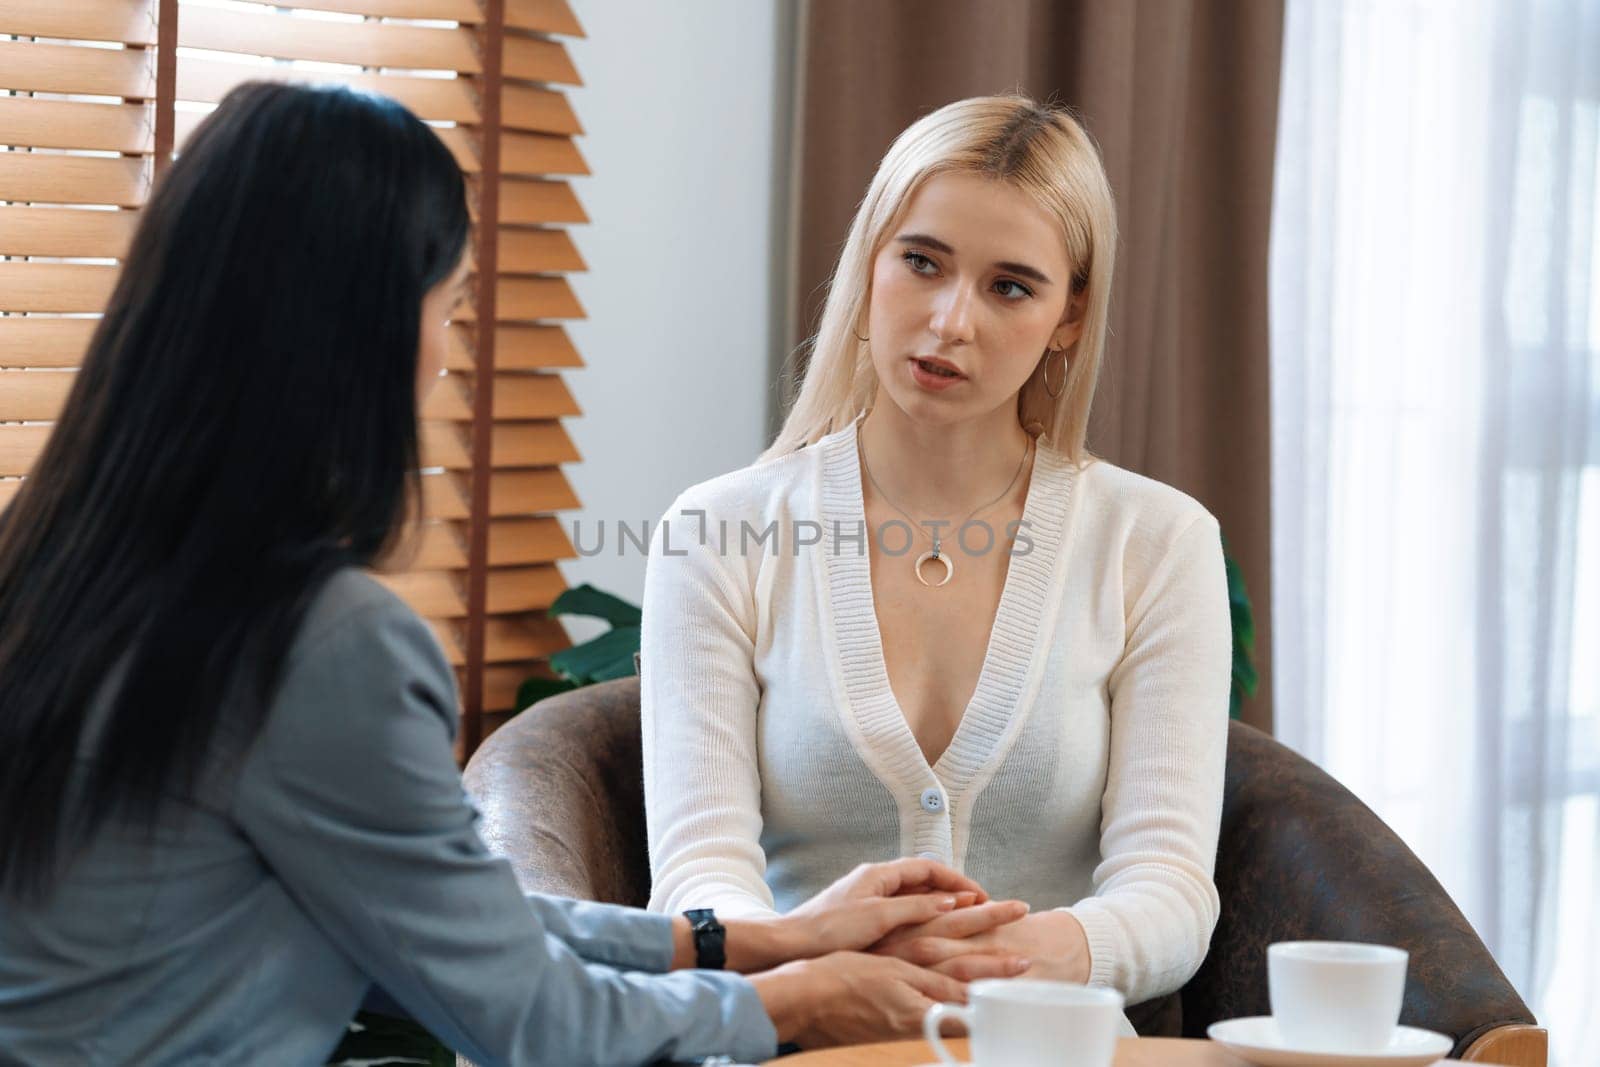 Psychological consultation on mental health or seeking help from professional, young patient on therapy session while psychiatrist making diagnostic on mental illness. Mental treatment session. Blithe